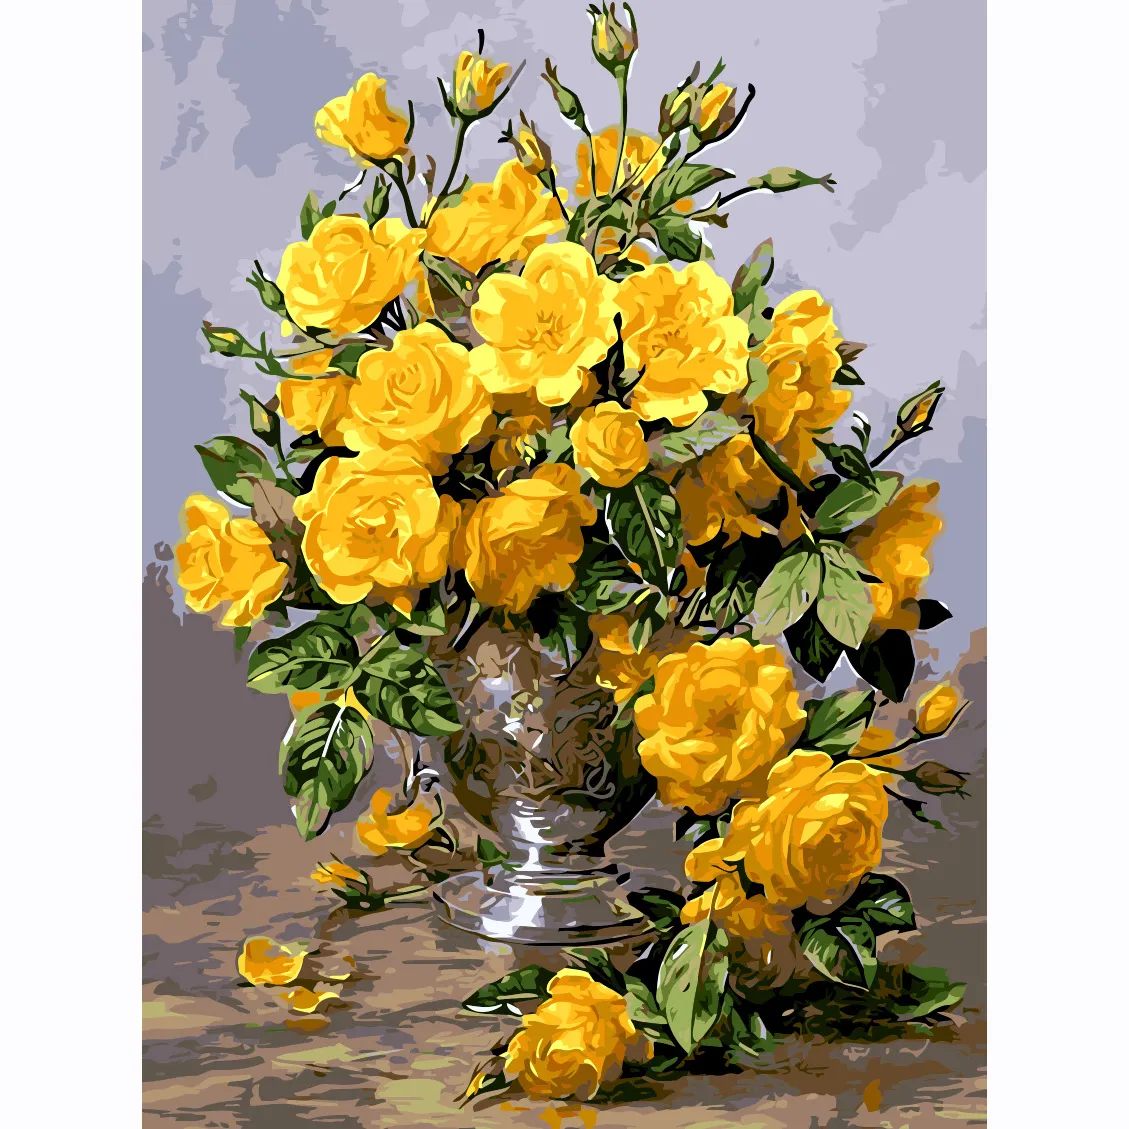 50*60cm DIY Hand Painted Flowers Paintings House Decor Yellow Rose Oil Painting By Numbers